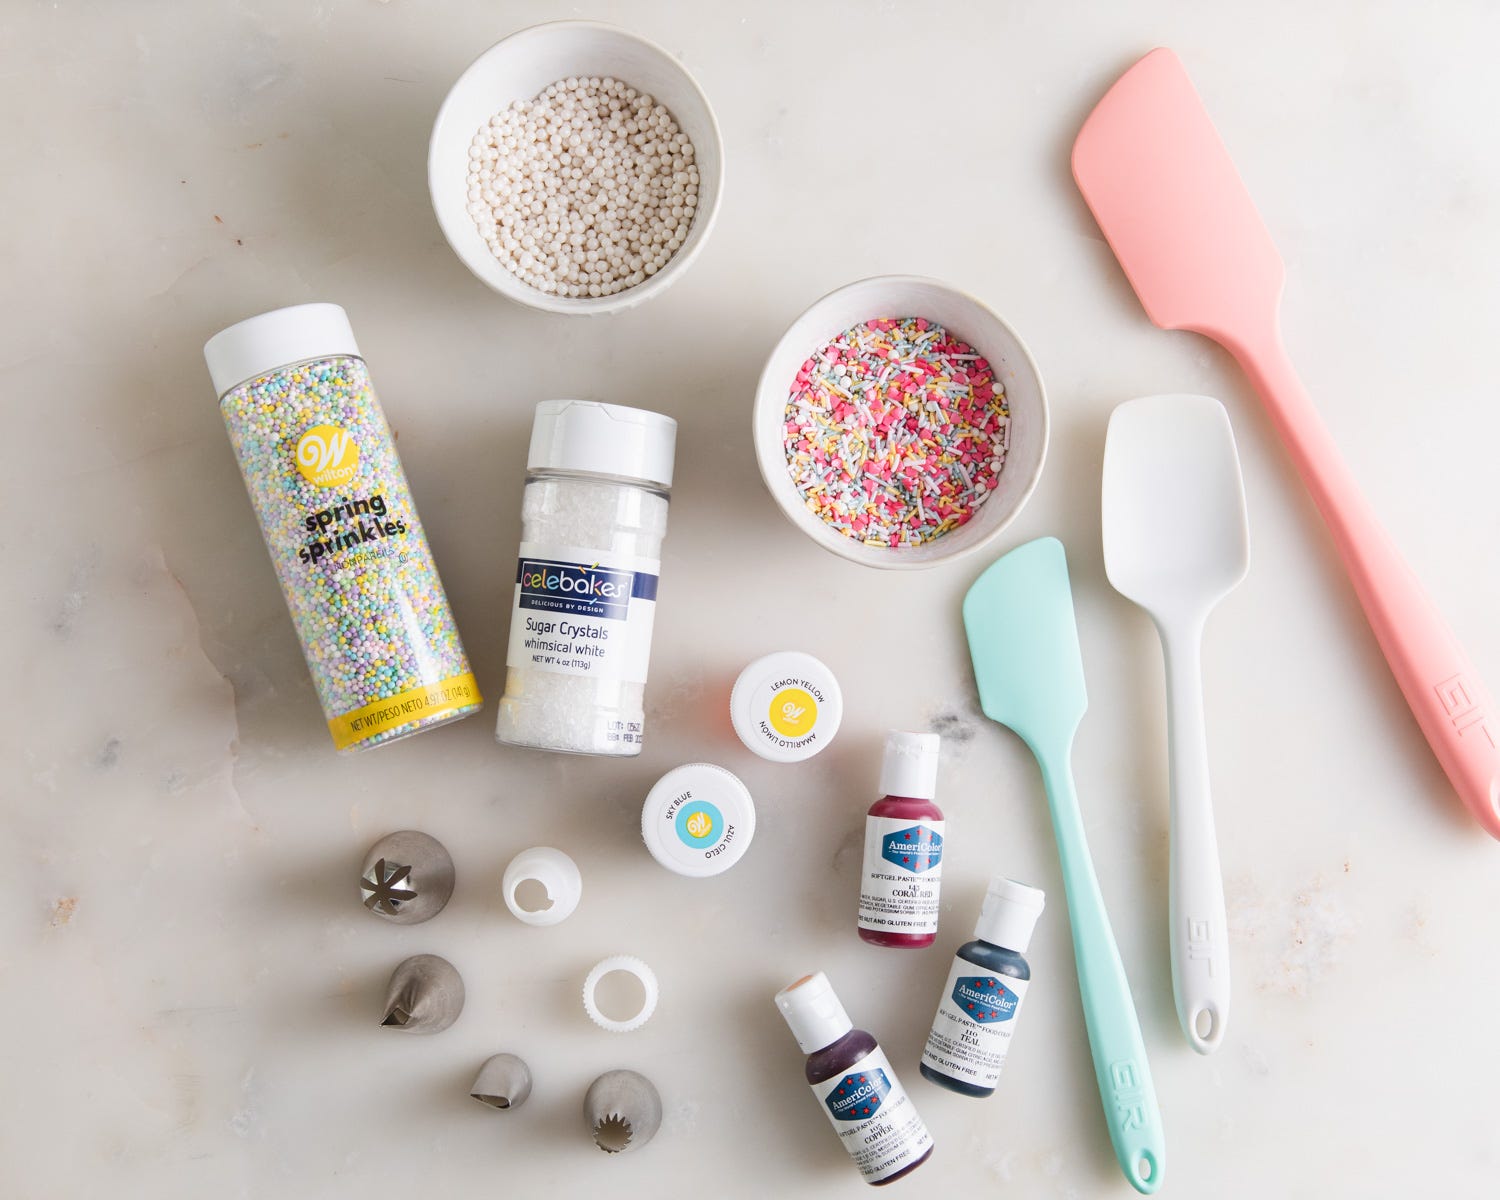 The 6 Best Cake Decorating Tools in 2022